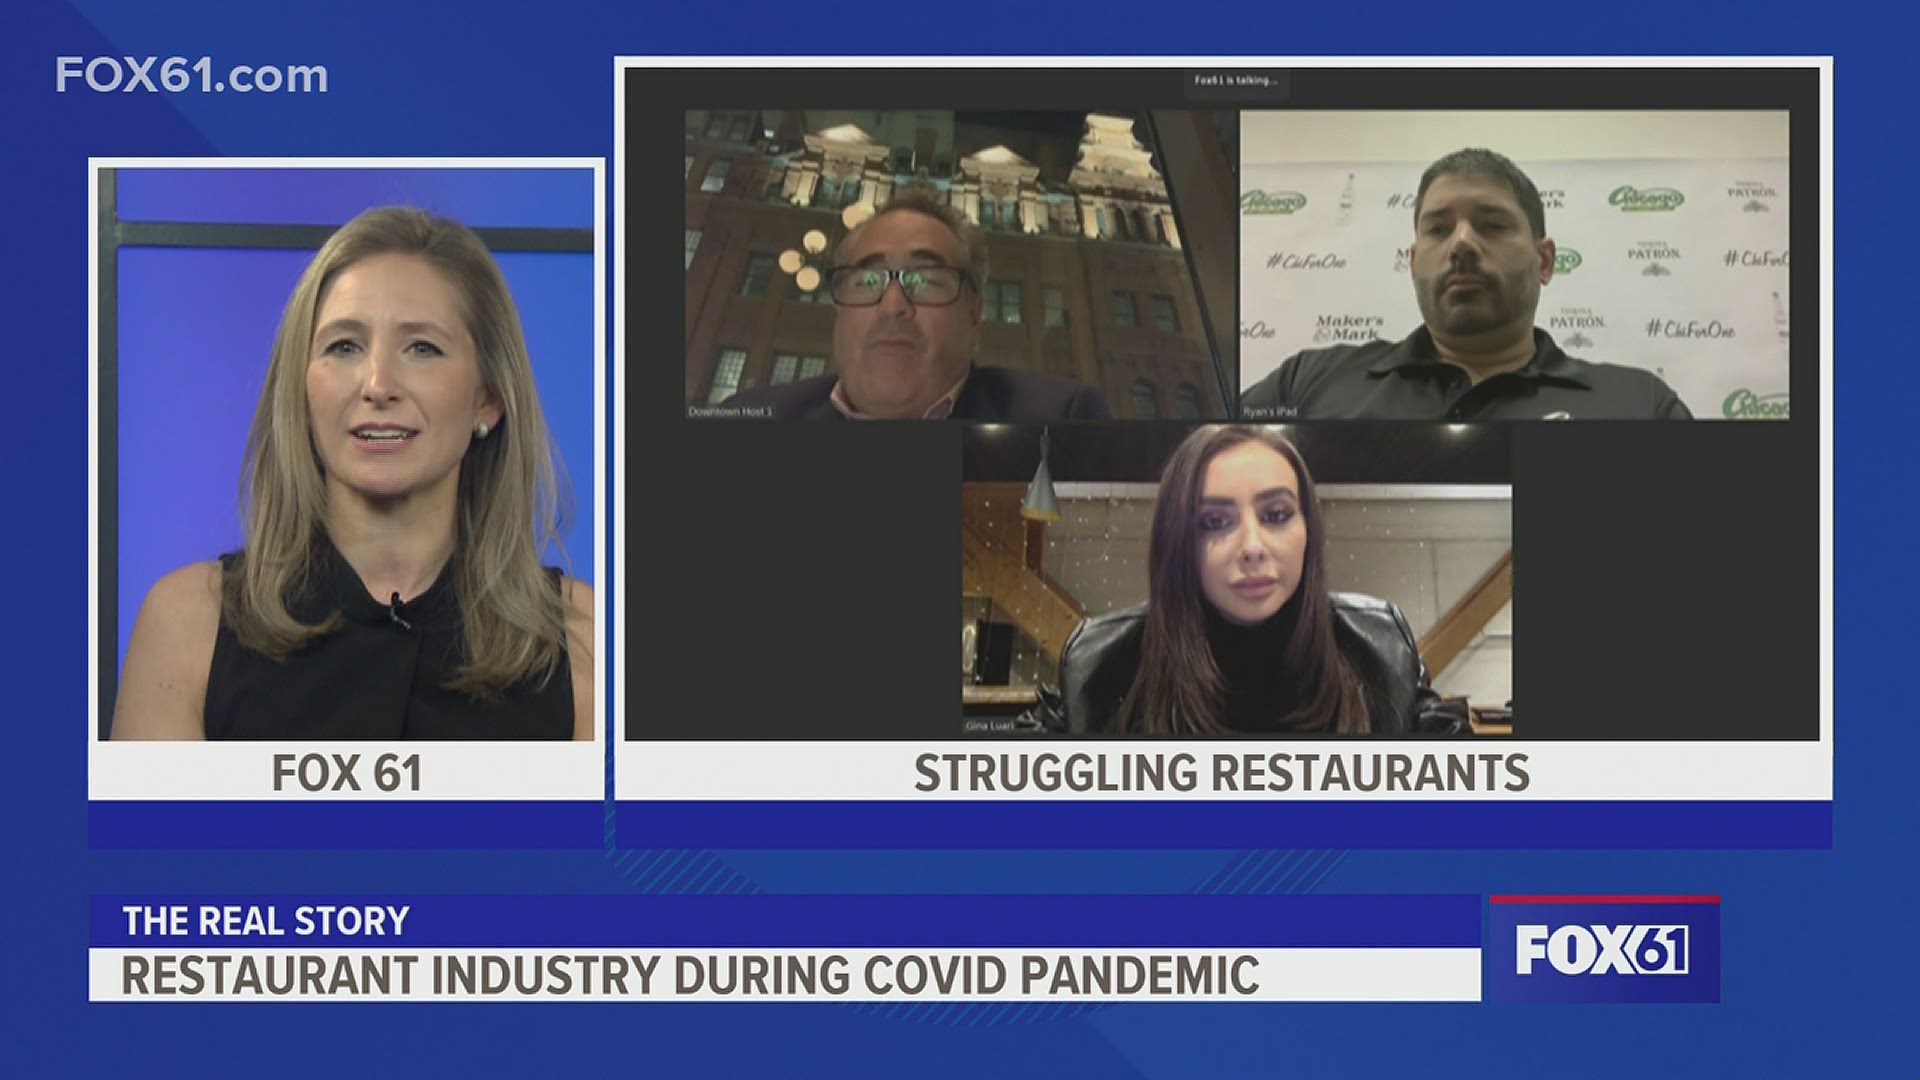 State restaurant owners and managers talk about how they've kept their doors open, and their customers safe during Covid.